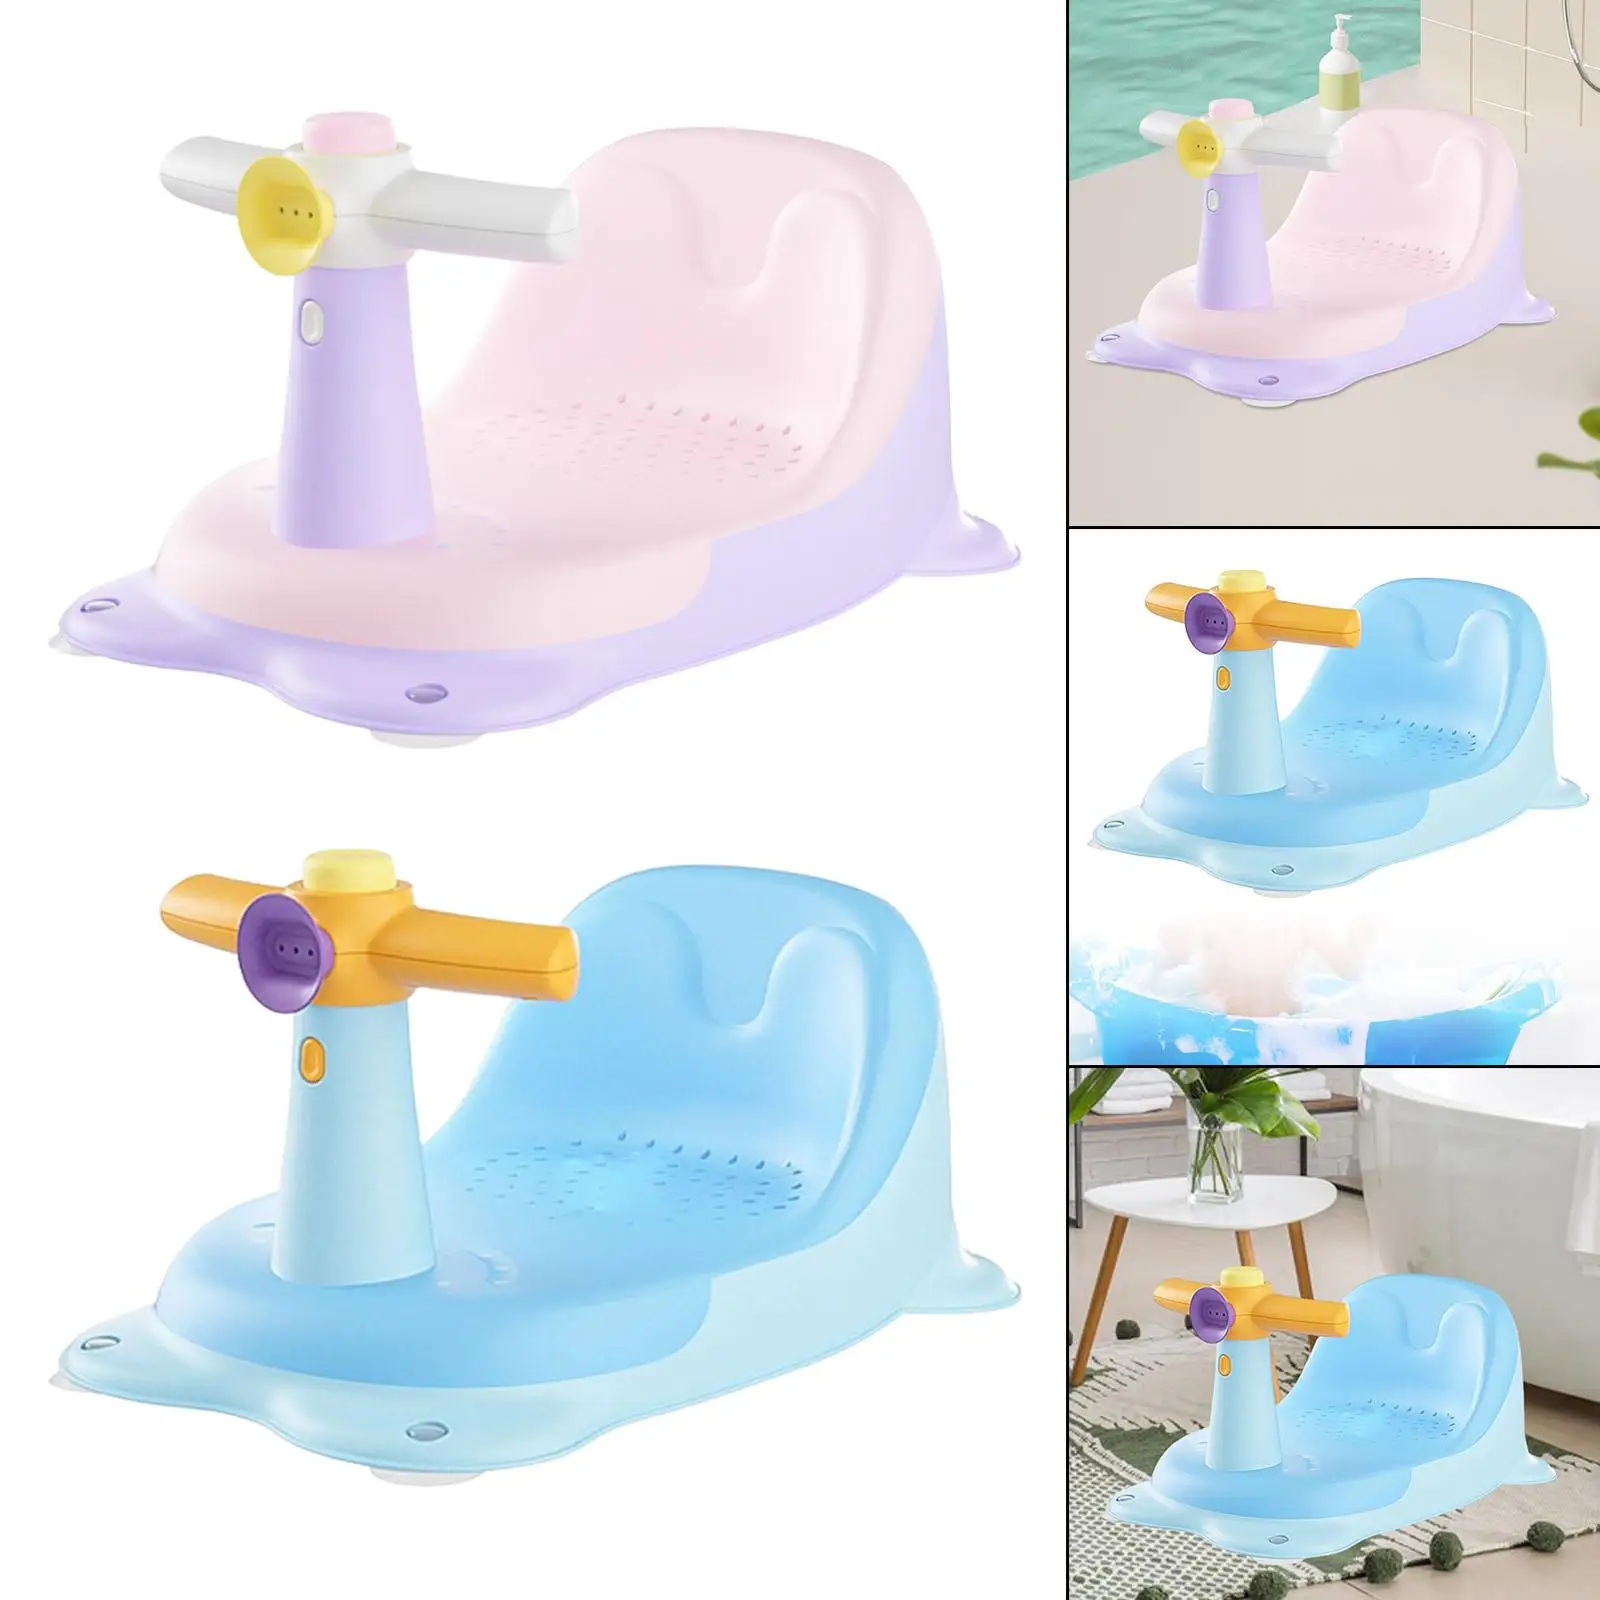 Baby Bath Seat Bath Seat Support Seat Pad Bath Chair Comfortable for Baby Girls